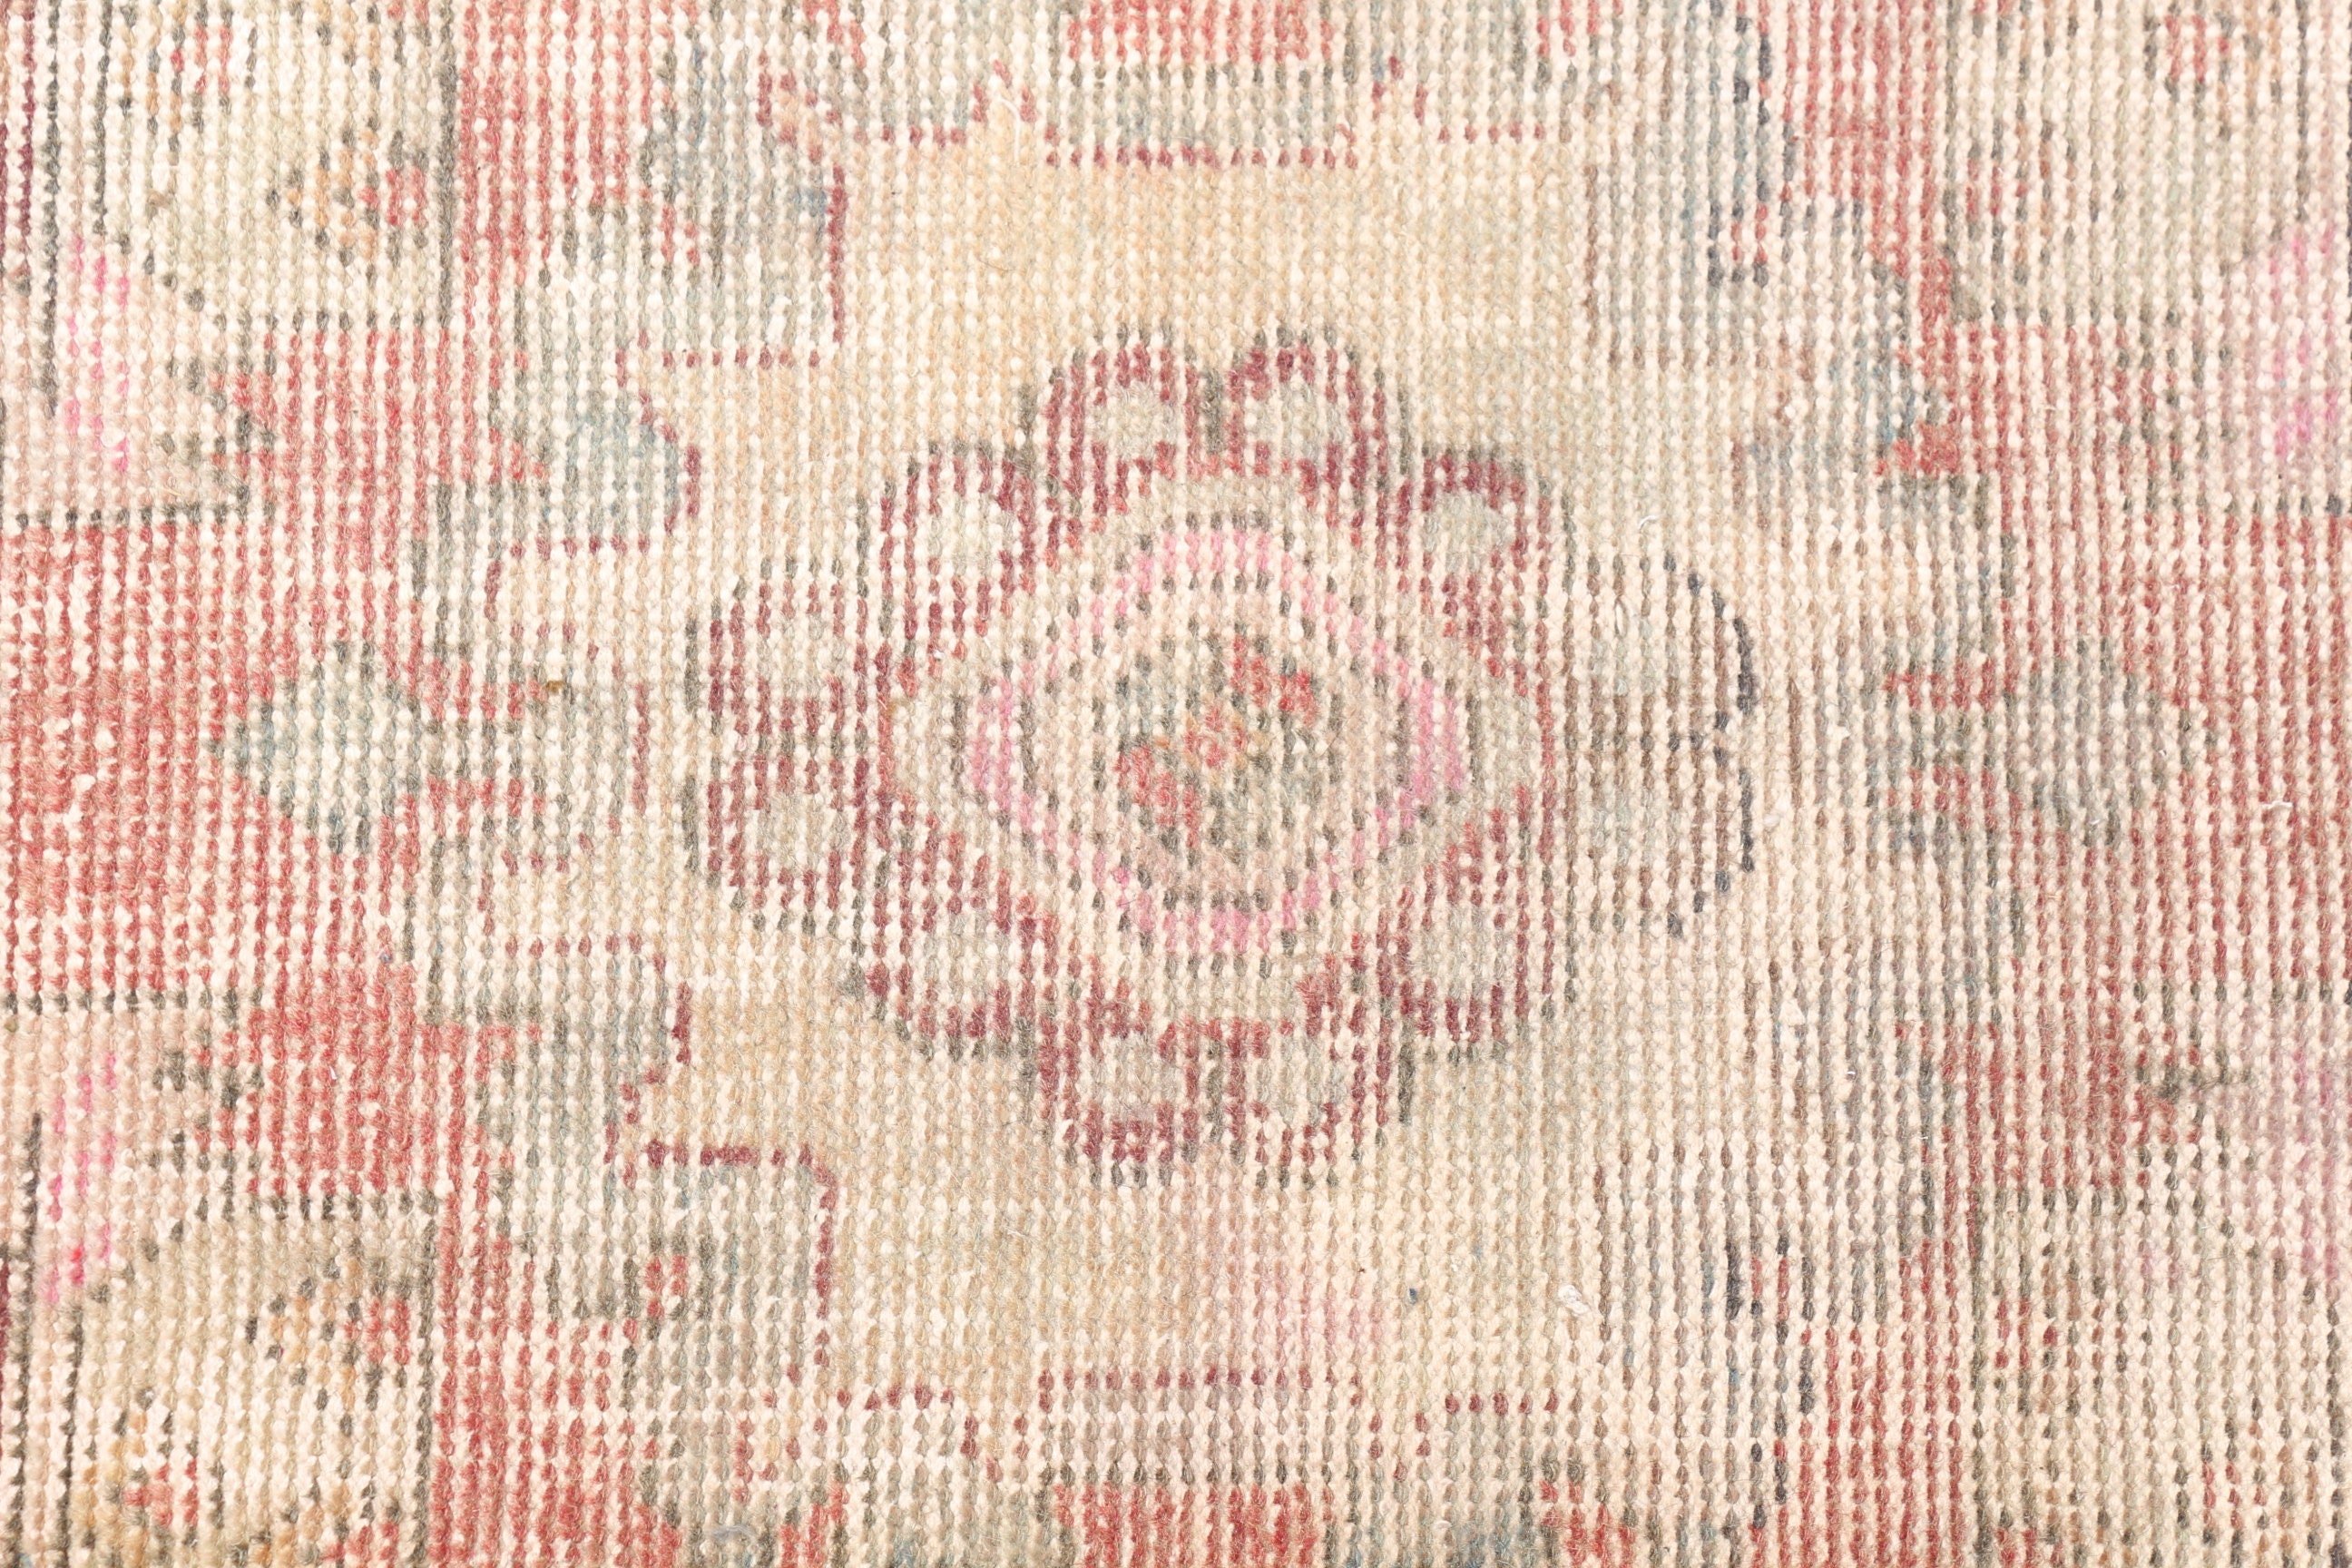 Kitchen Rugs, Turkish Rugs, Rugs for Entry, Car Mat Rugs, Bedroom Rug, Cute Bath Mat Rug, Vintage Rug, Red Oushak Rug, 1.7x2.8 ft Small Rug